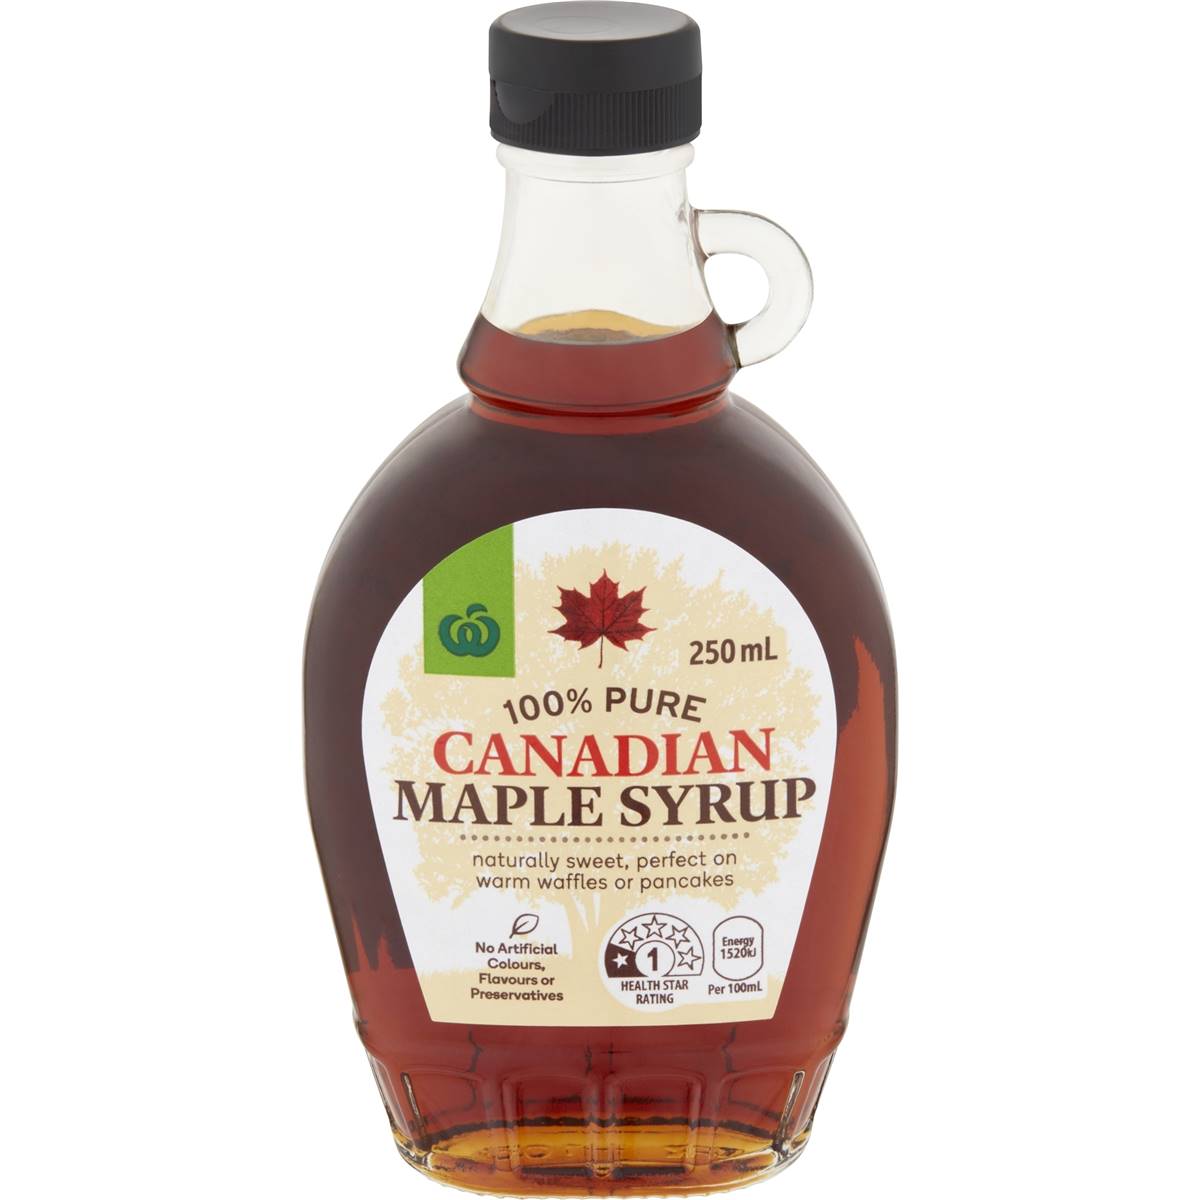 Calories in Woolworths 100% Canadian Maple Syrup